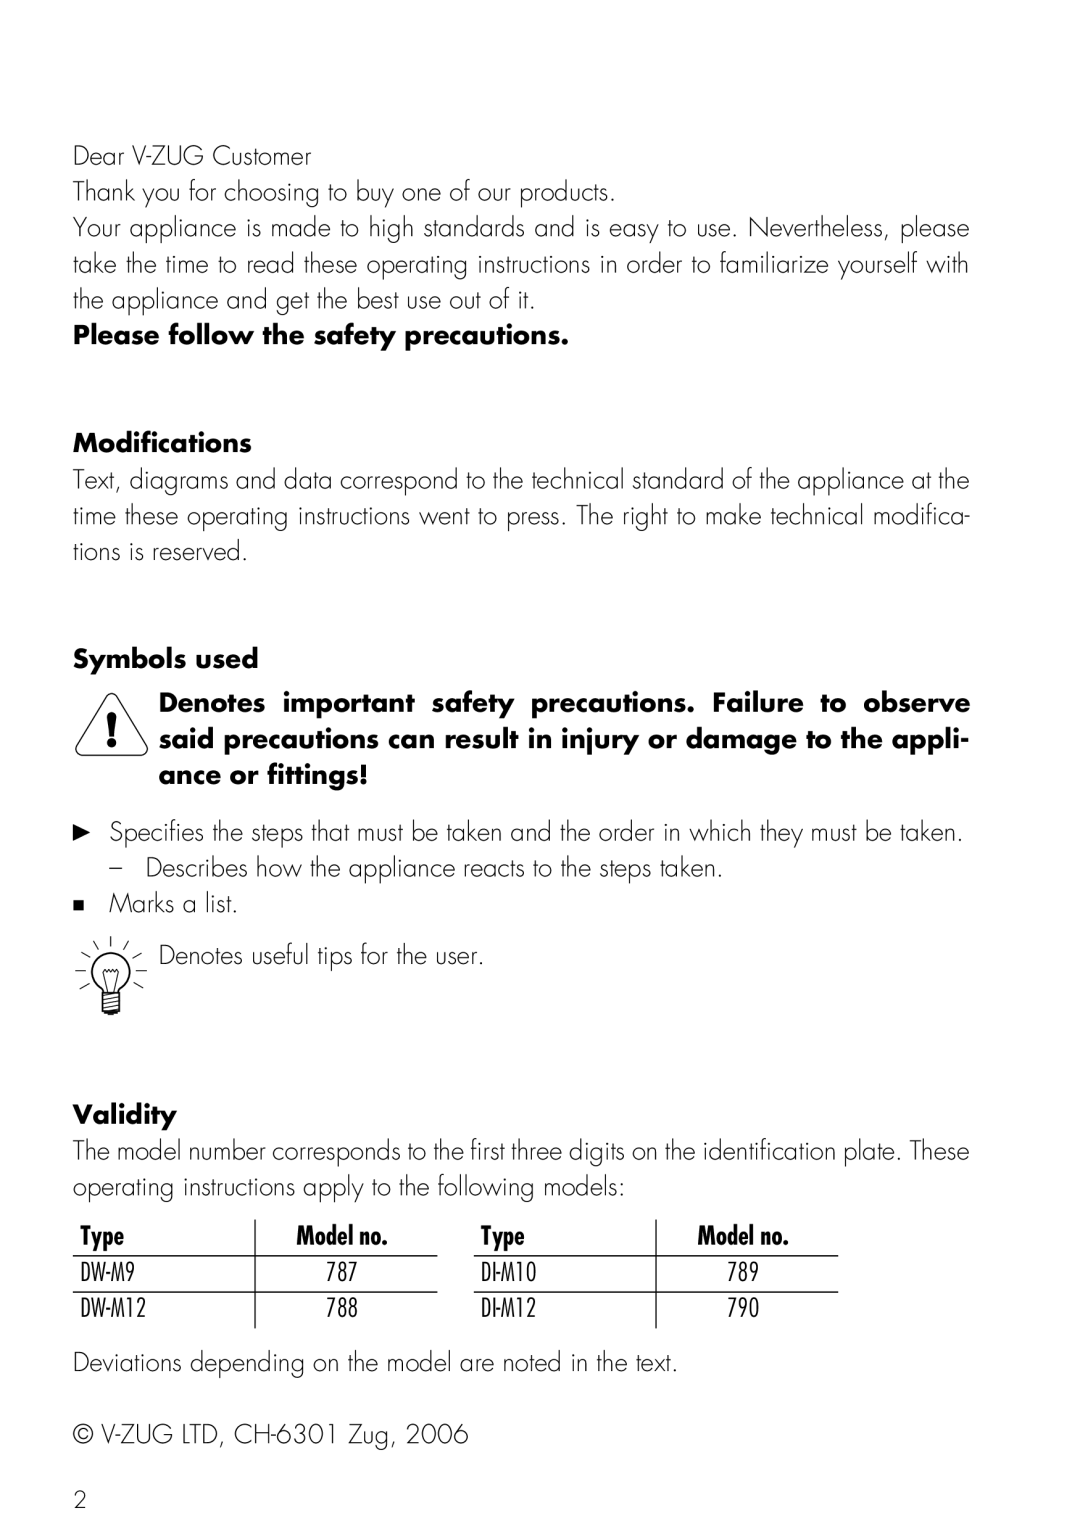 Mistral V ZUG LTD Please follow the safety precautions Modifications, Symbols used, Validity, Type, Model no 